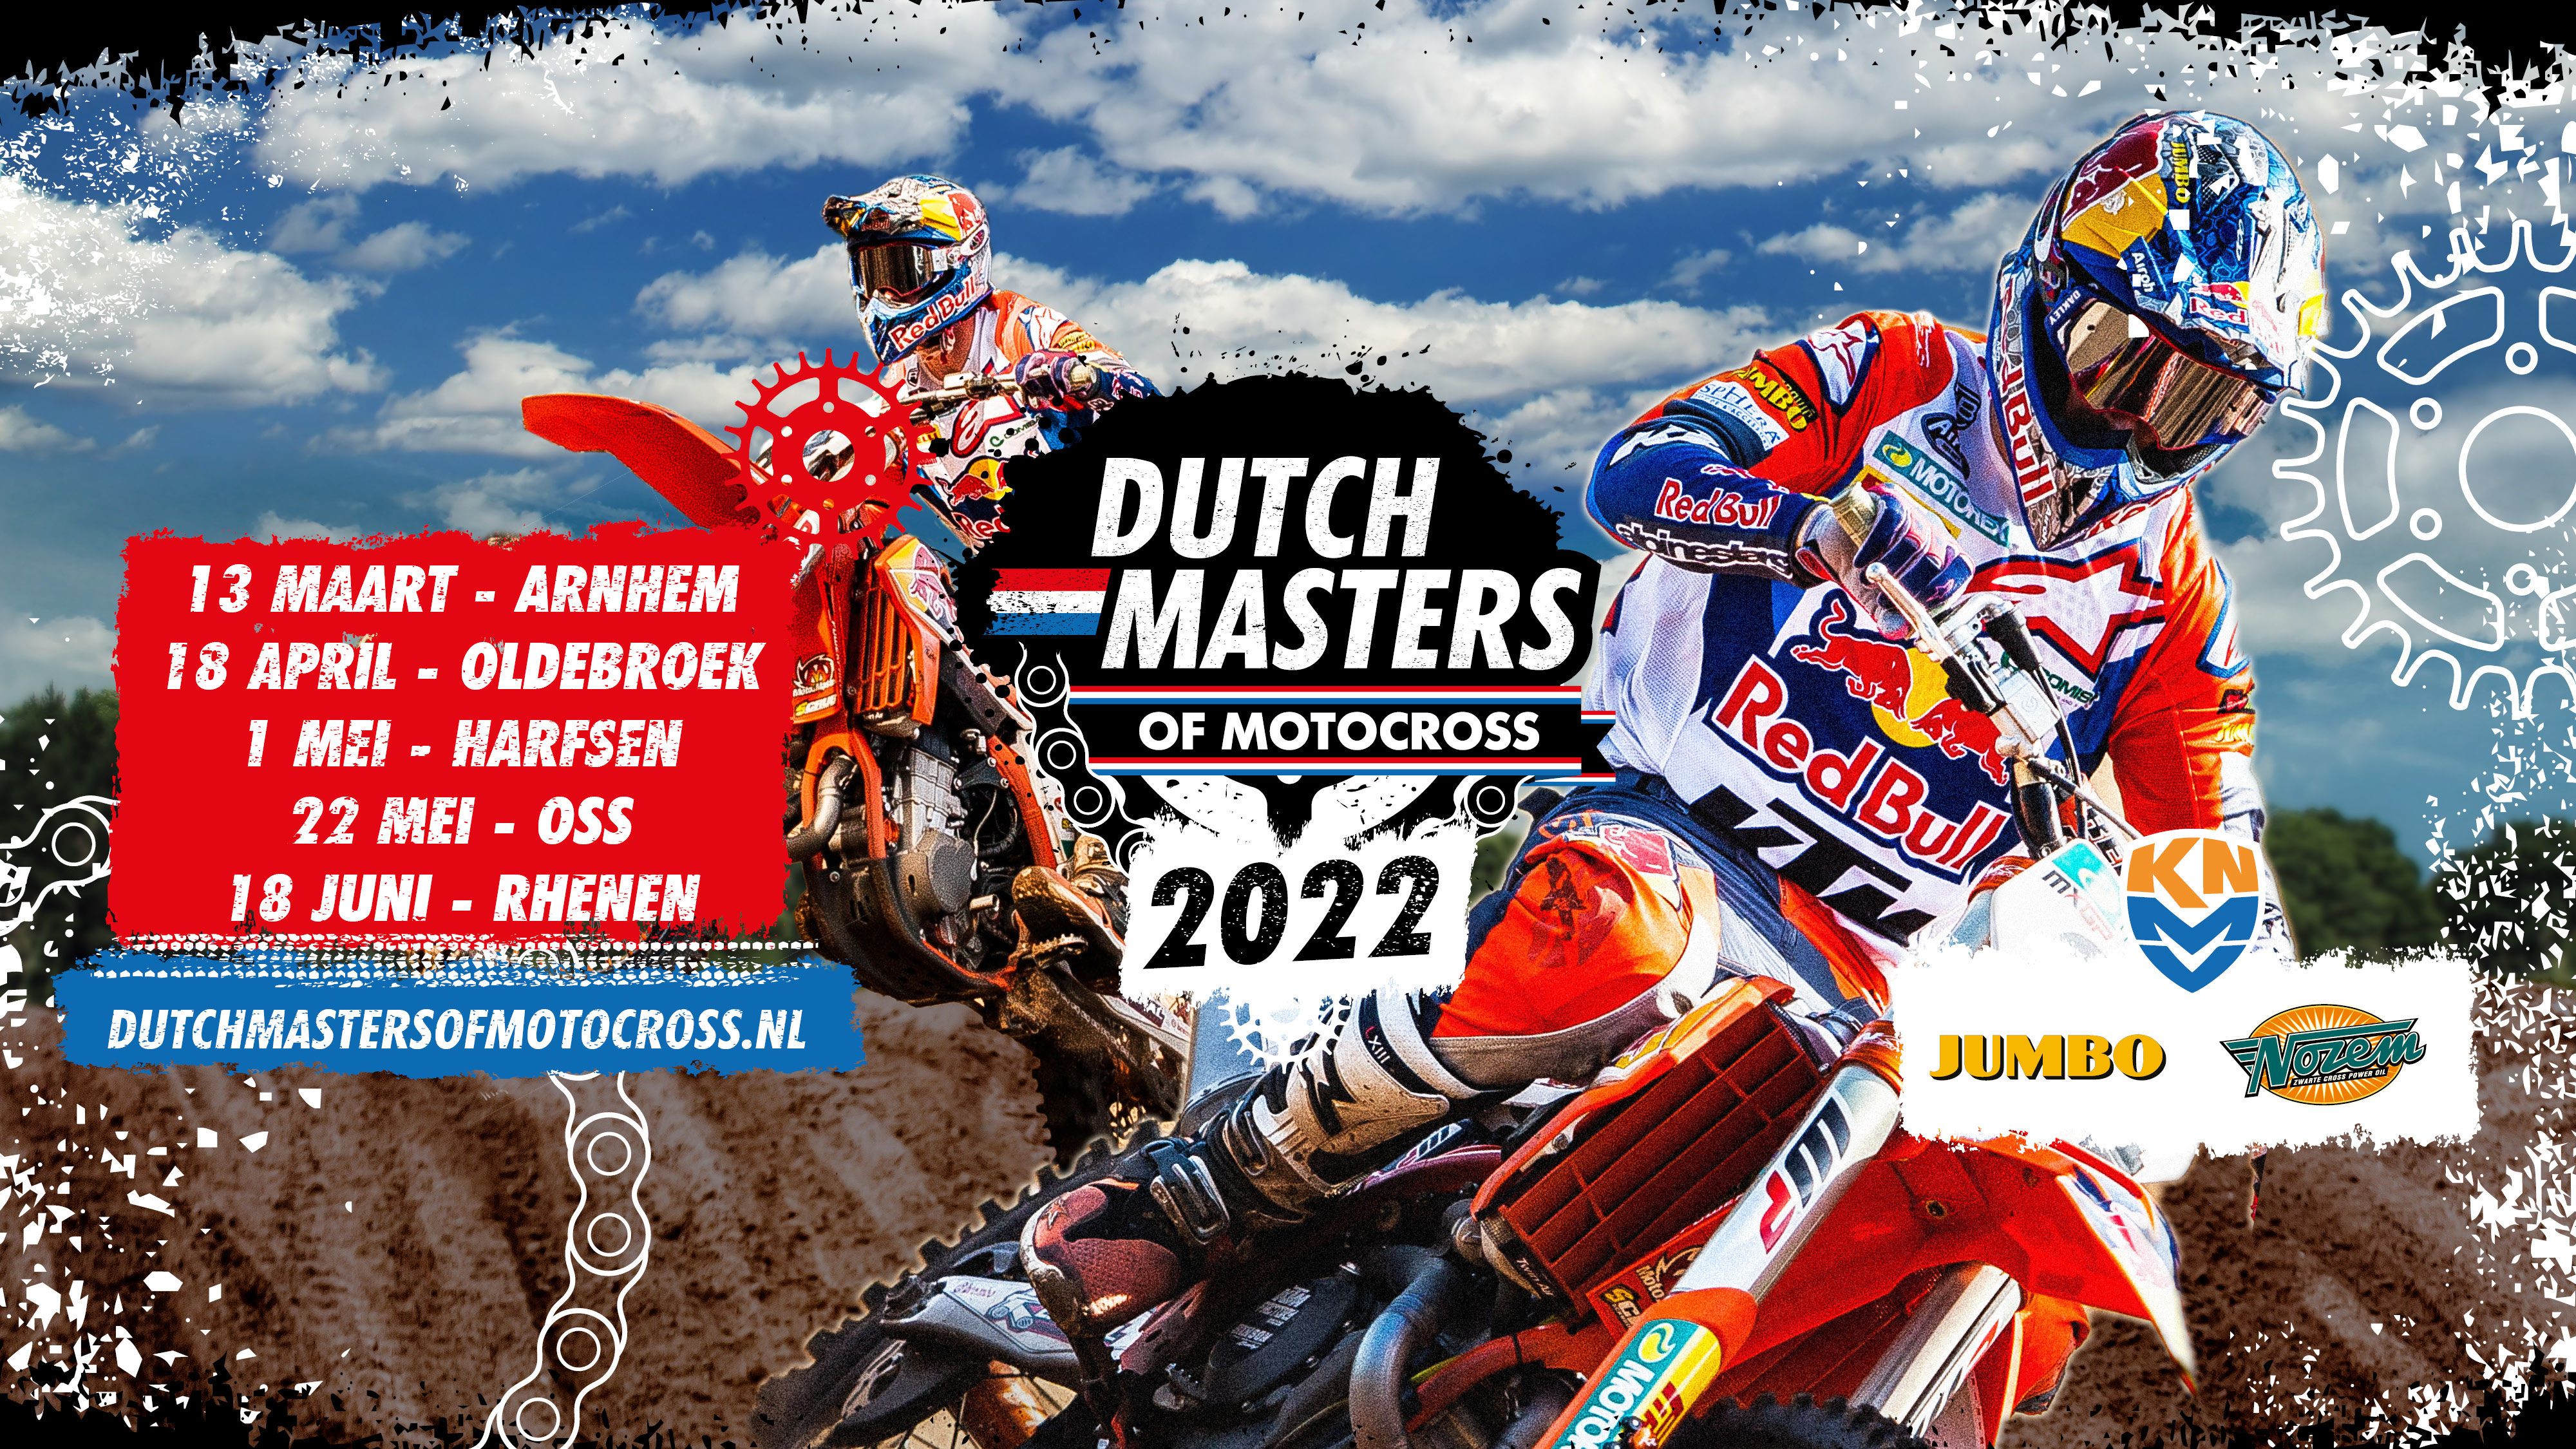 Dutch Masters Of Motocross '22 - Facebook Visual 1920x1080px Alle data